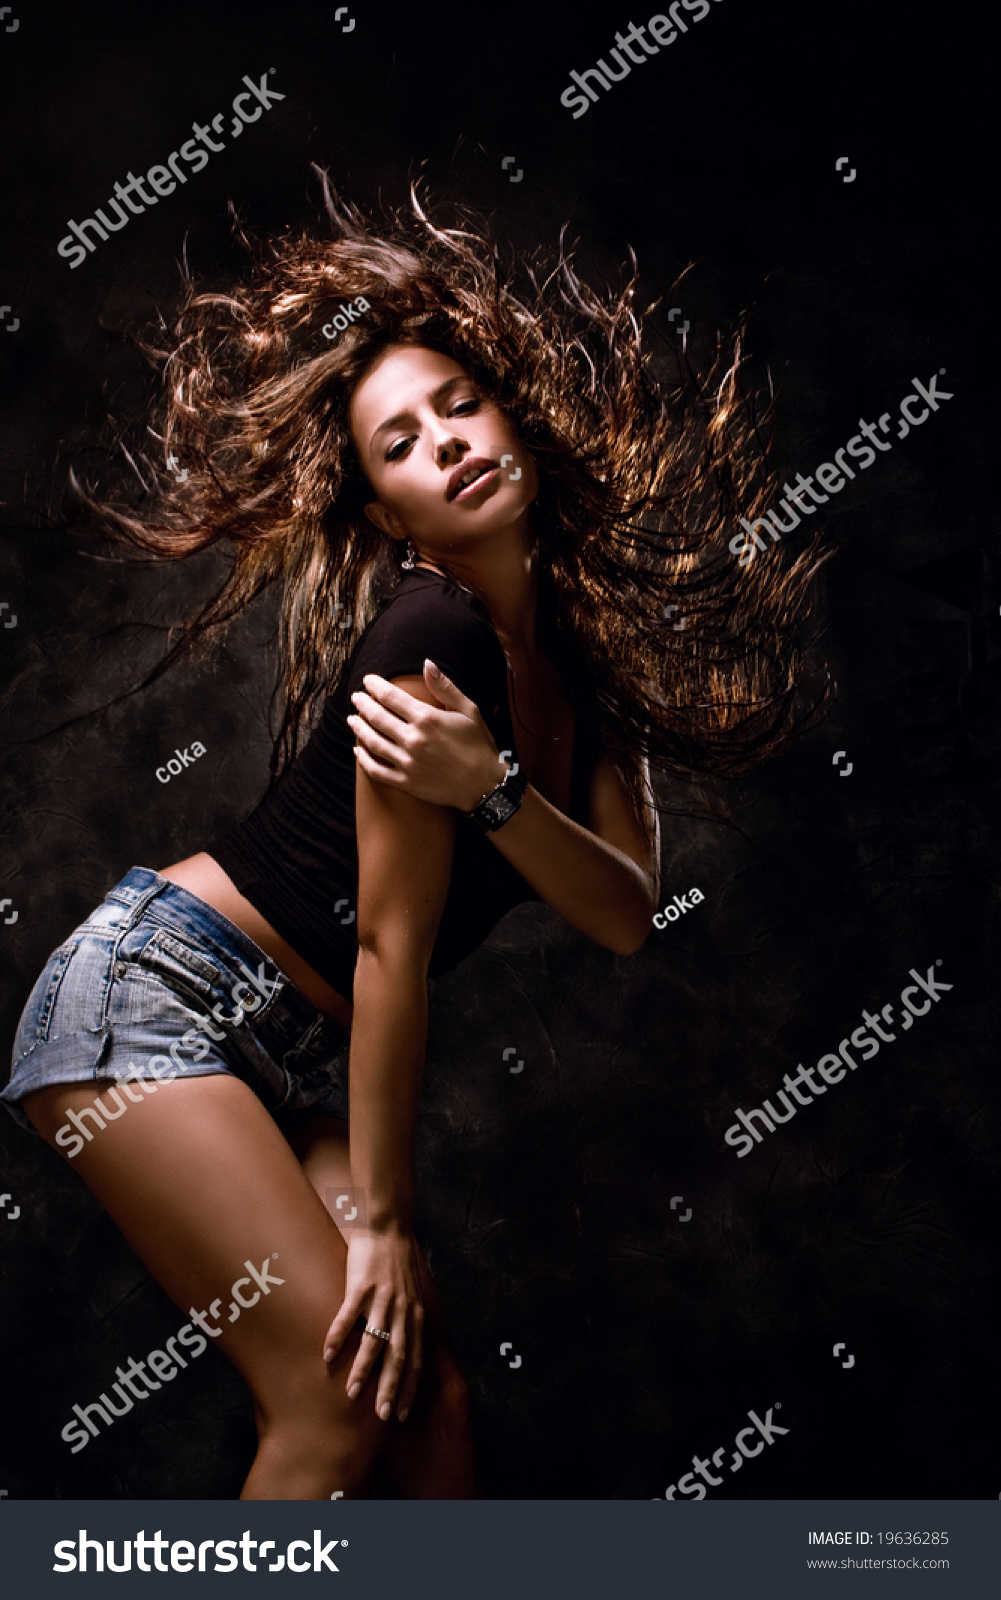 Attractive Young Woman Dancing Hair Flying Stock Photo 19636285 ...